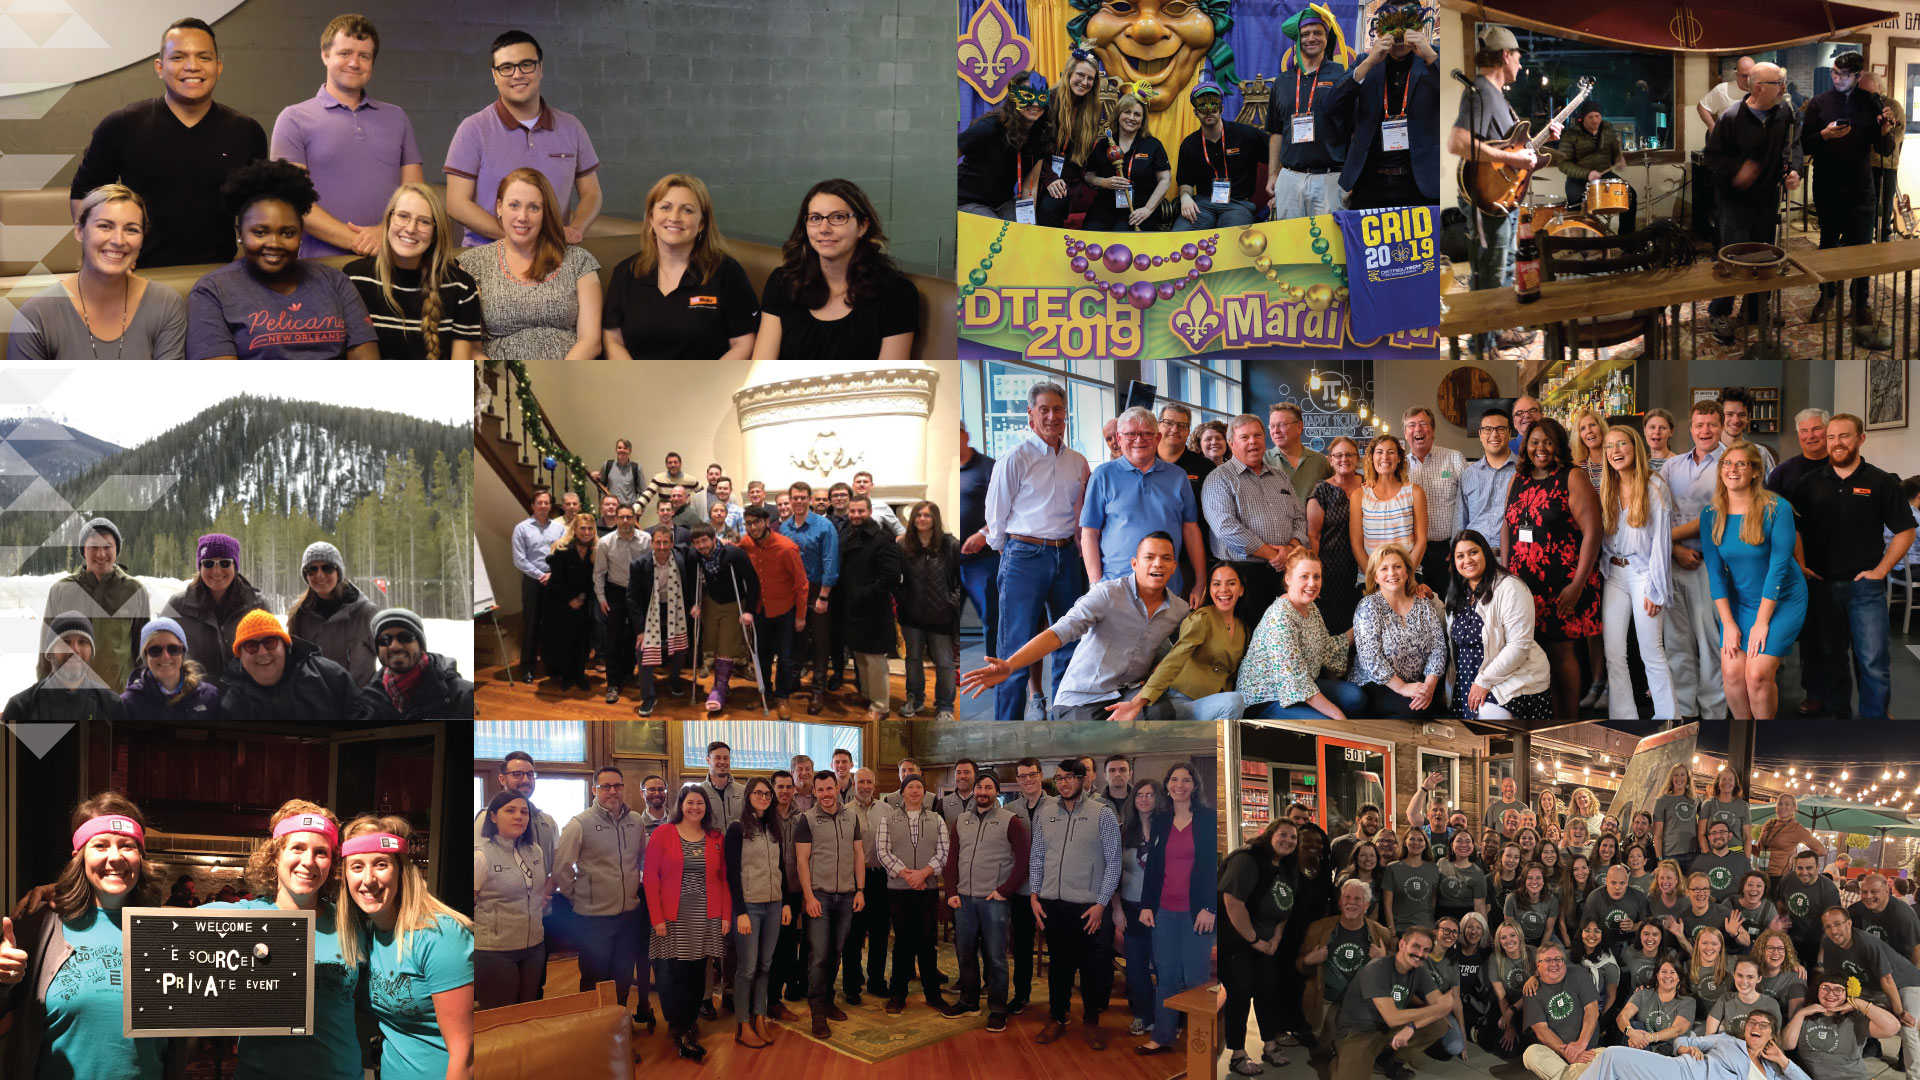 A collage of images of E Source employees, both formal and candid, from all of the company's divisions across the US and Canada.